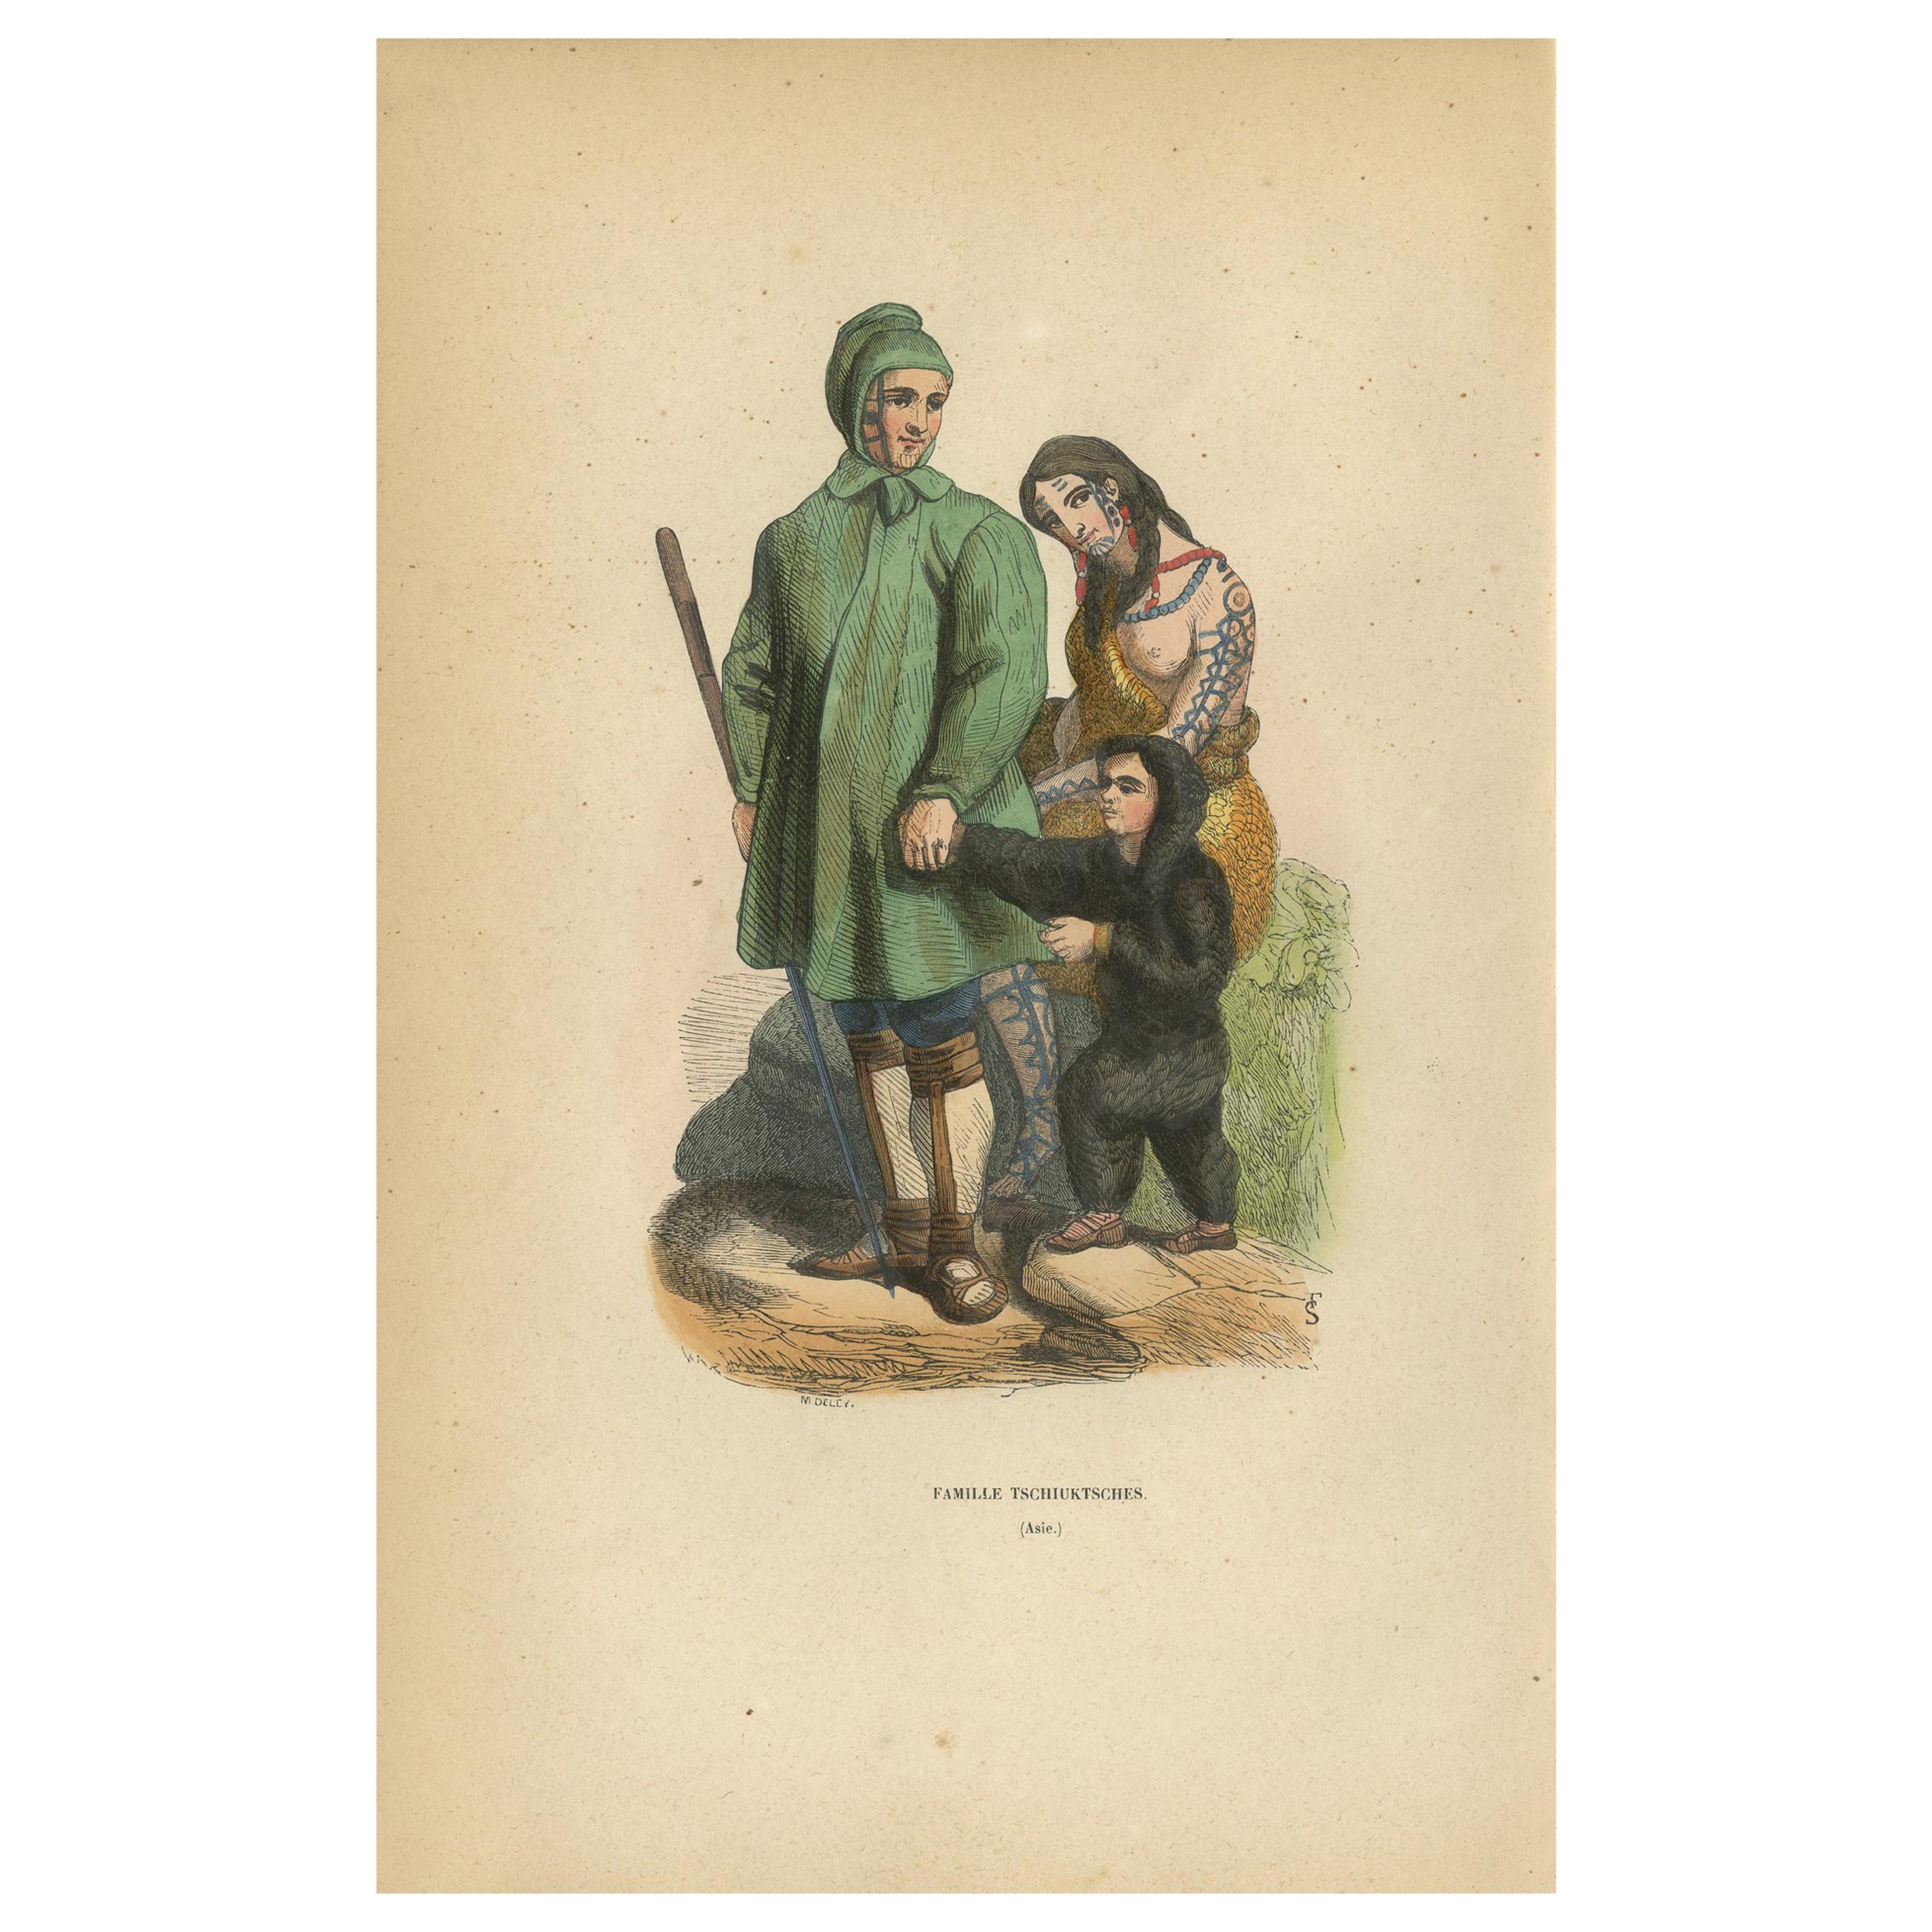 Antique Print of a Chukchi Family by Wahlen, 1843